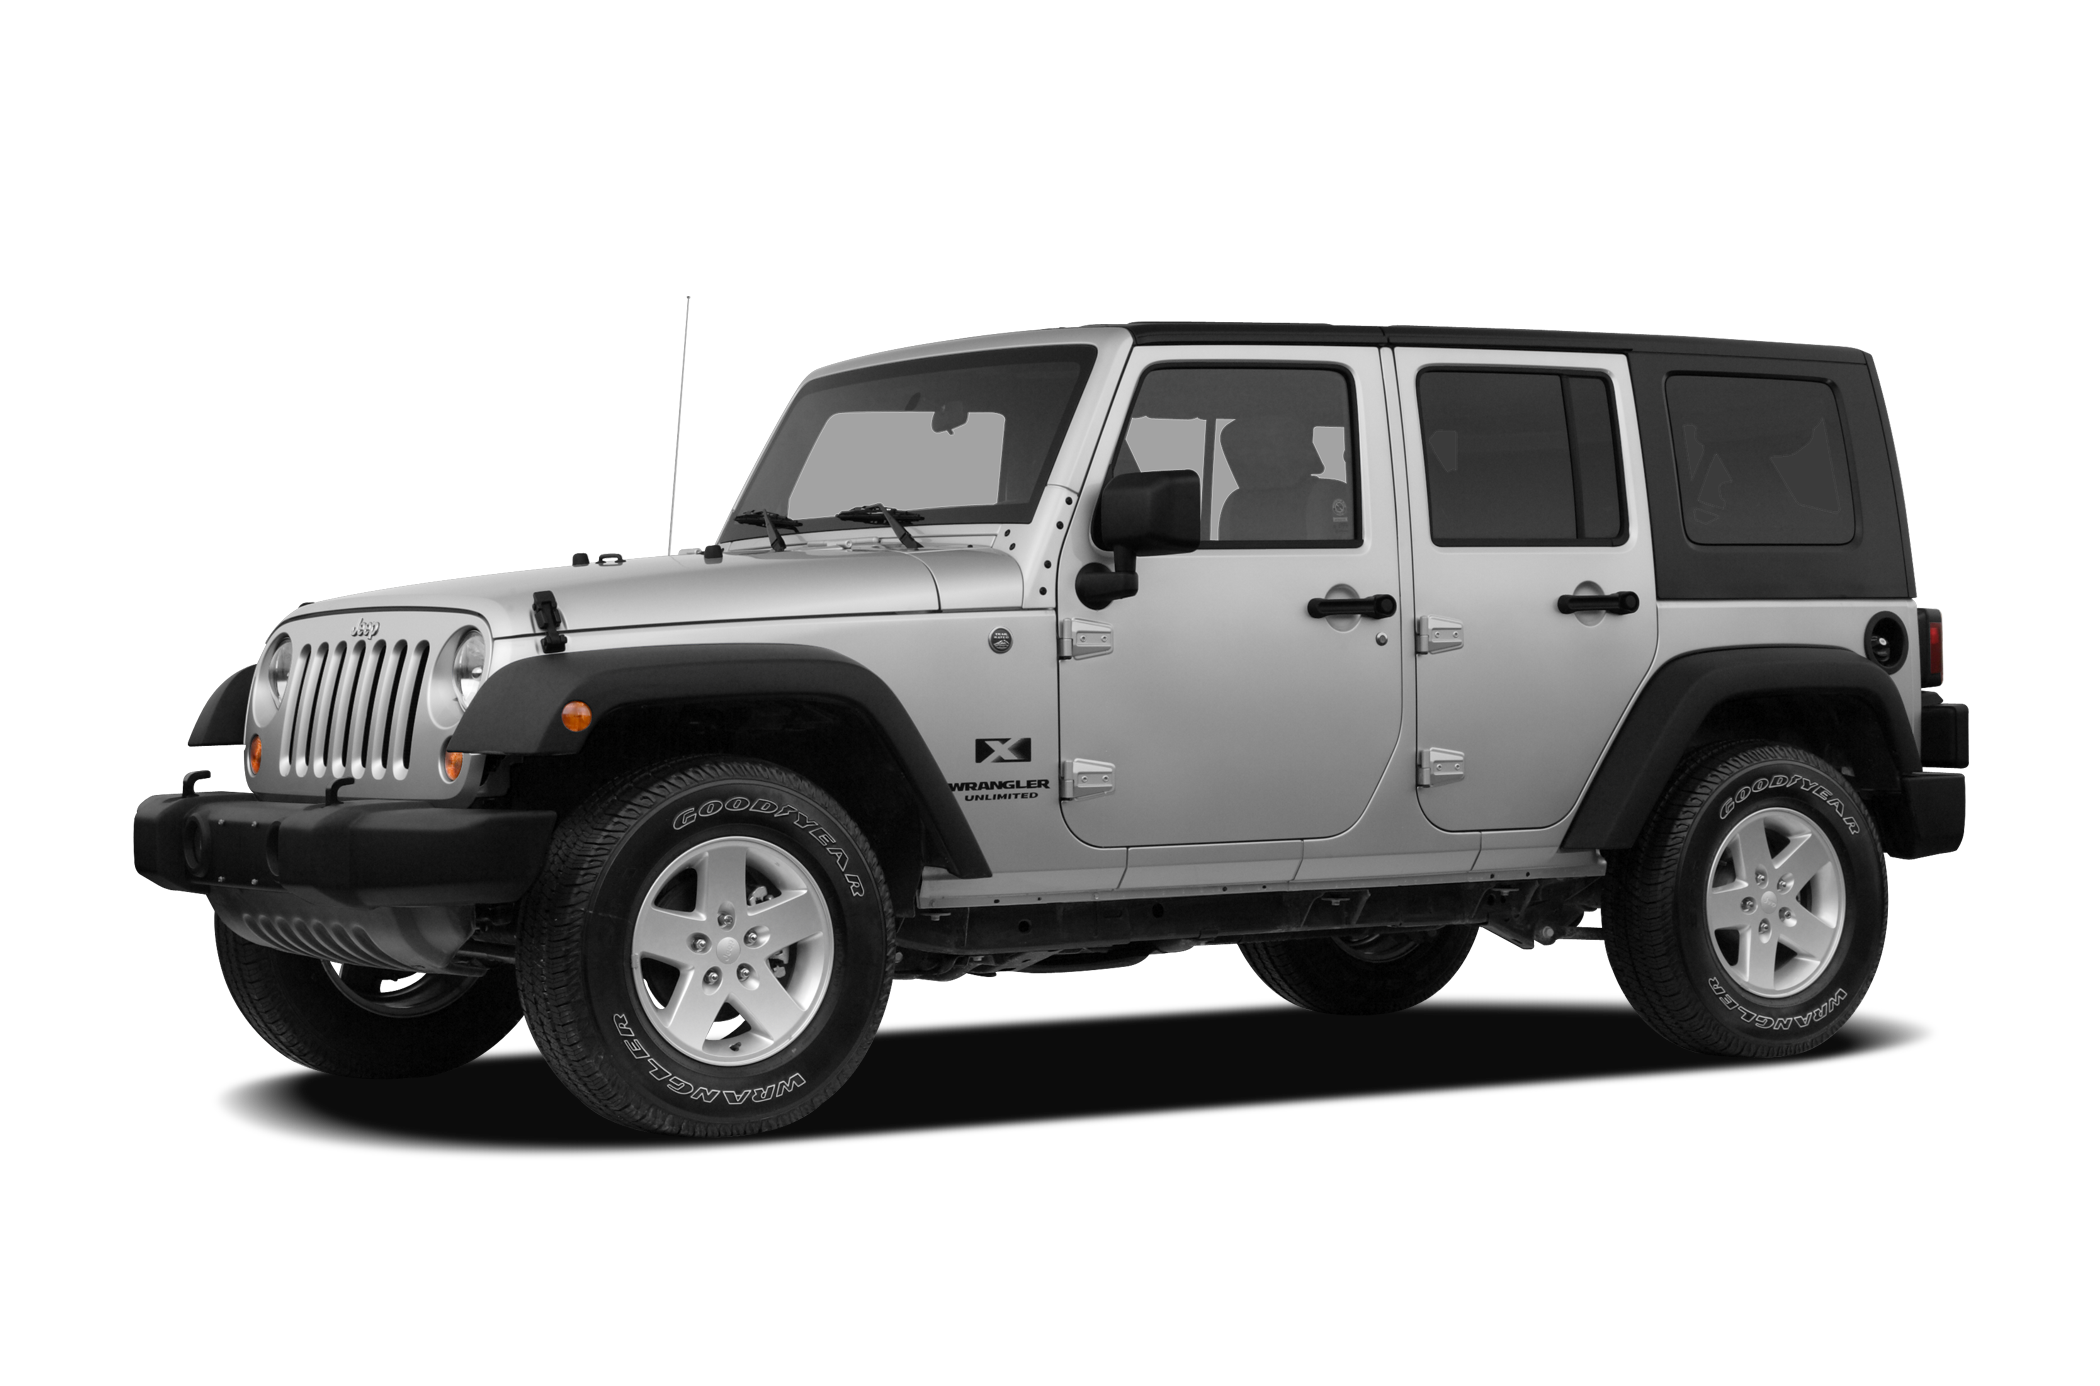 Used 2007 Jeep Wrangler for Sale Near Me 